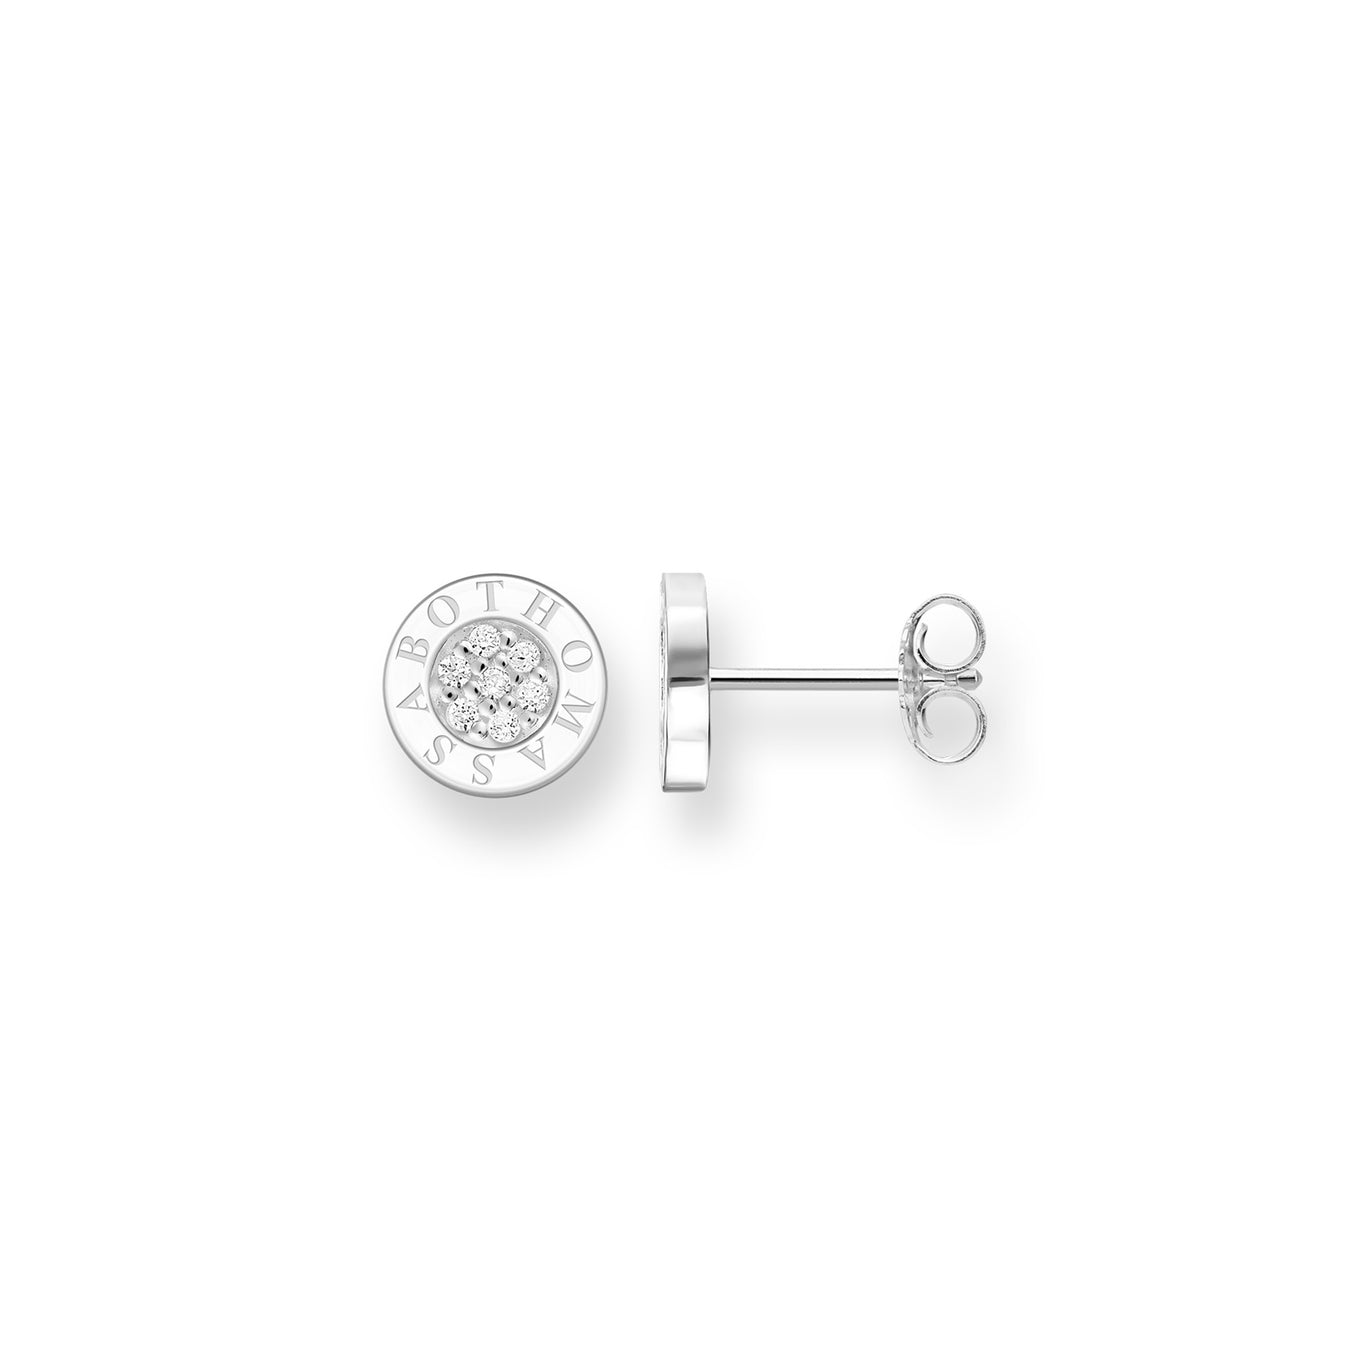 Thomas Sabo Silver Classic Pave Earrings